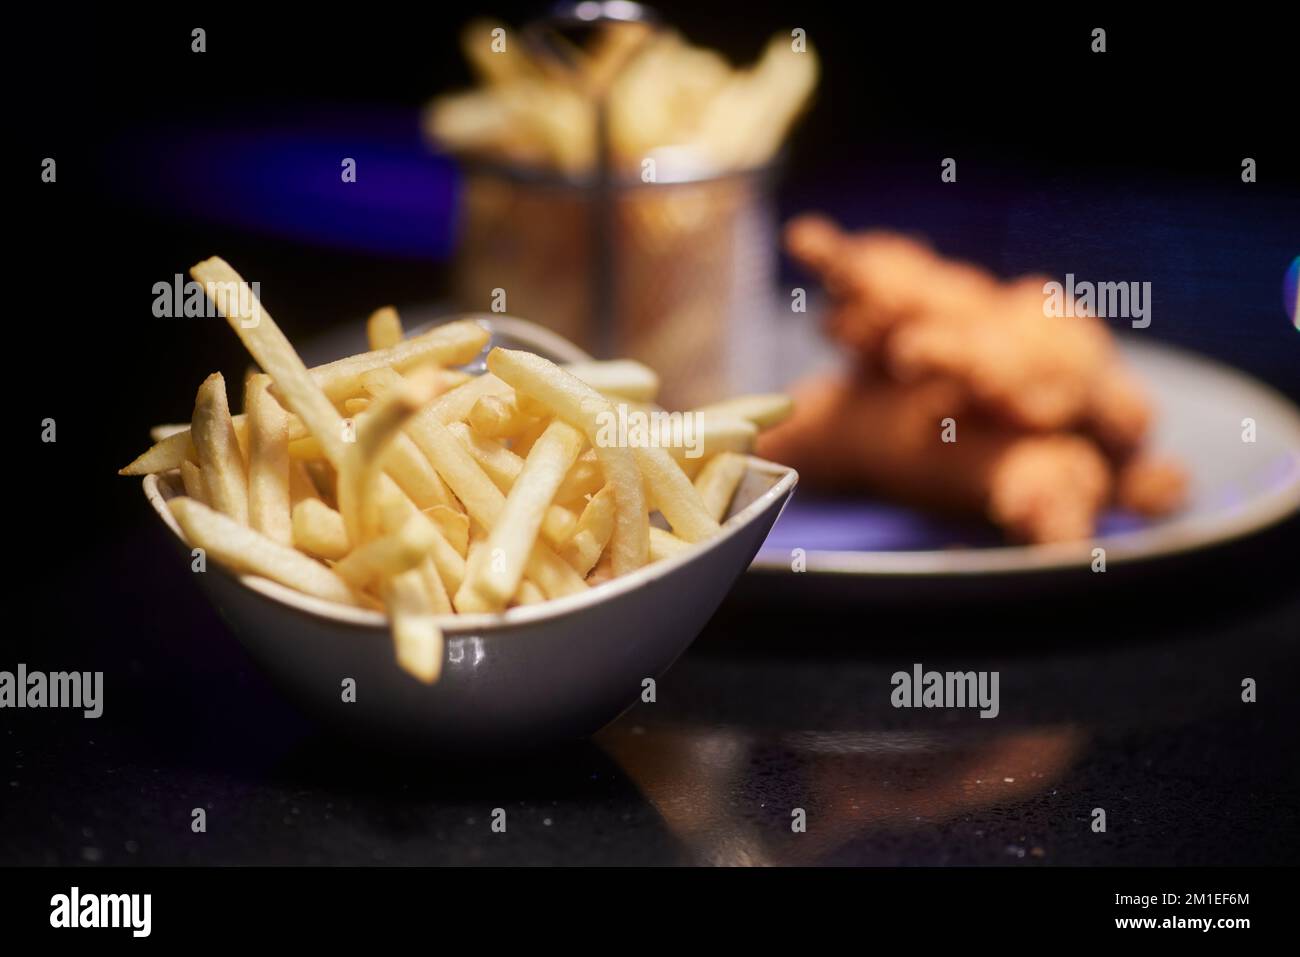 Bar food restaurant chicken and chips Stock Photo